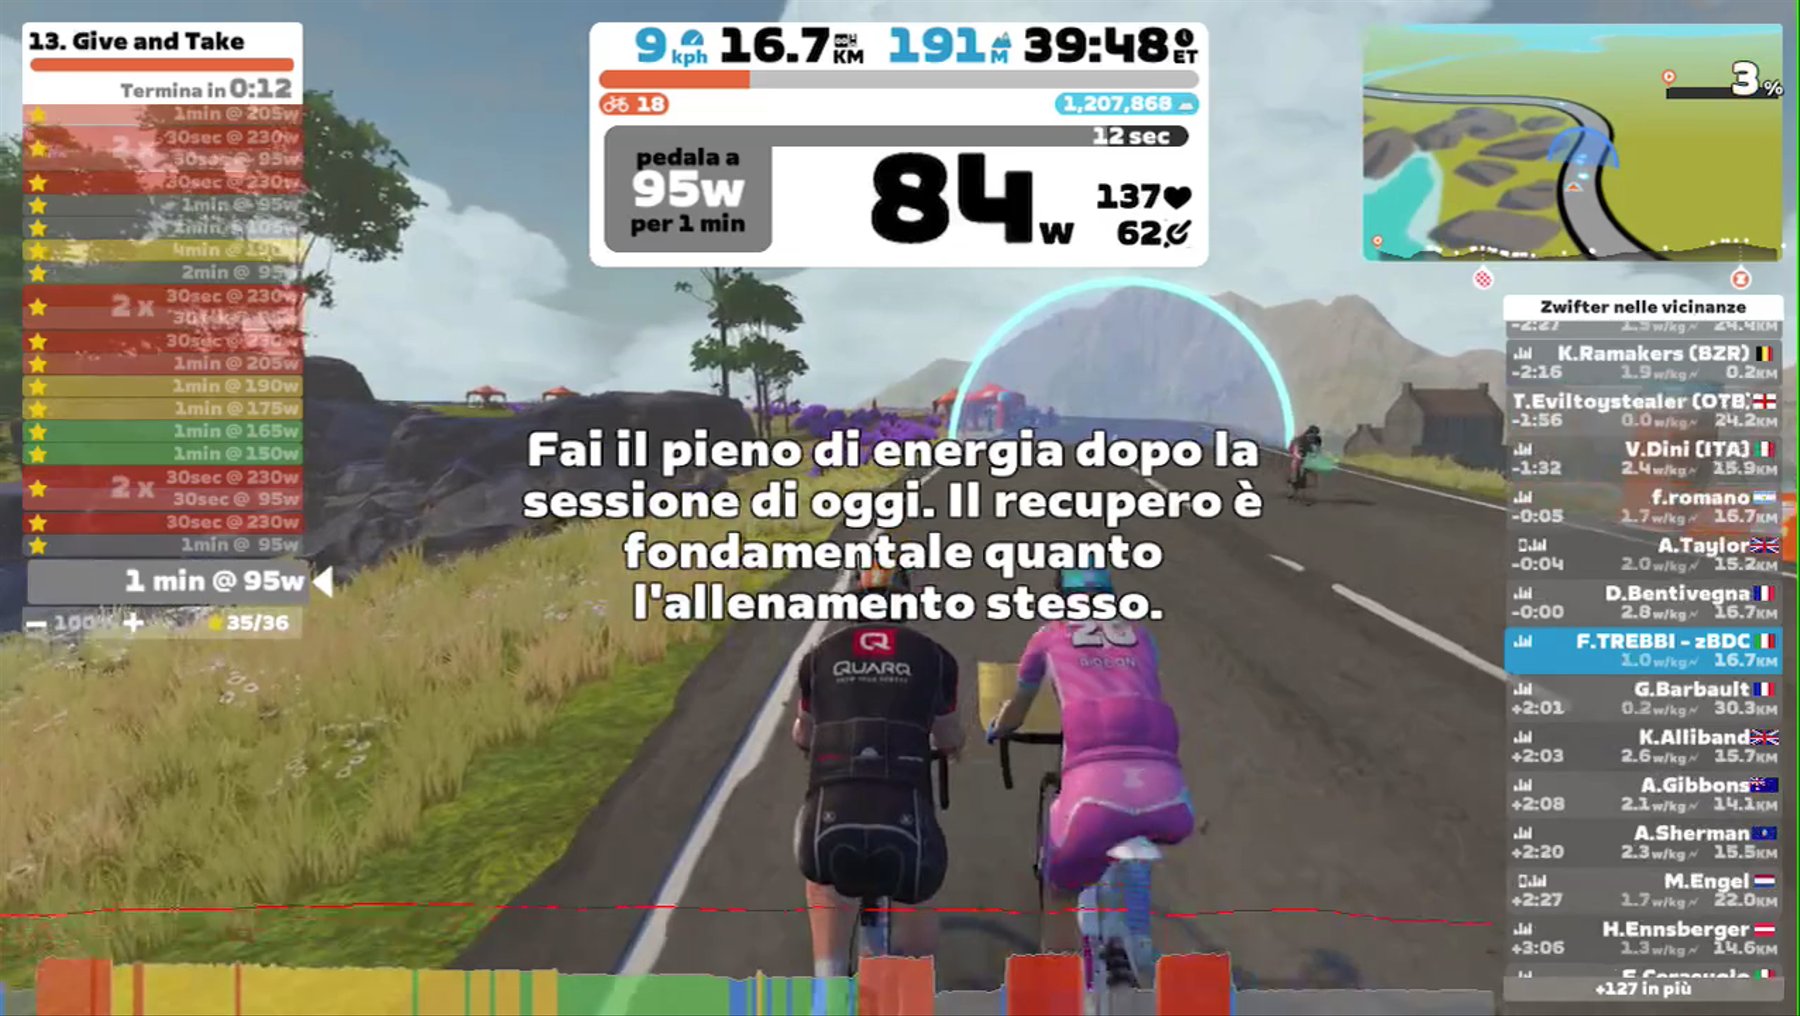 Zwift - 13. Give and Take in Scotland